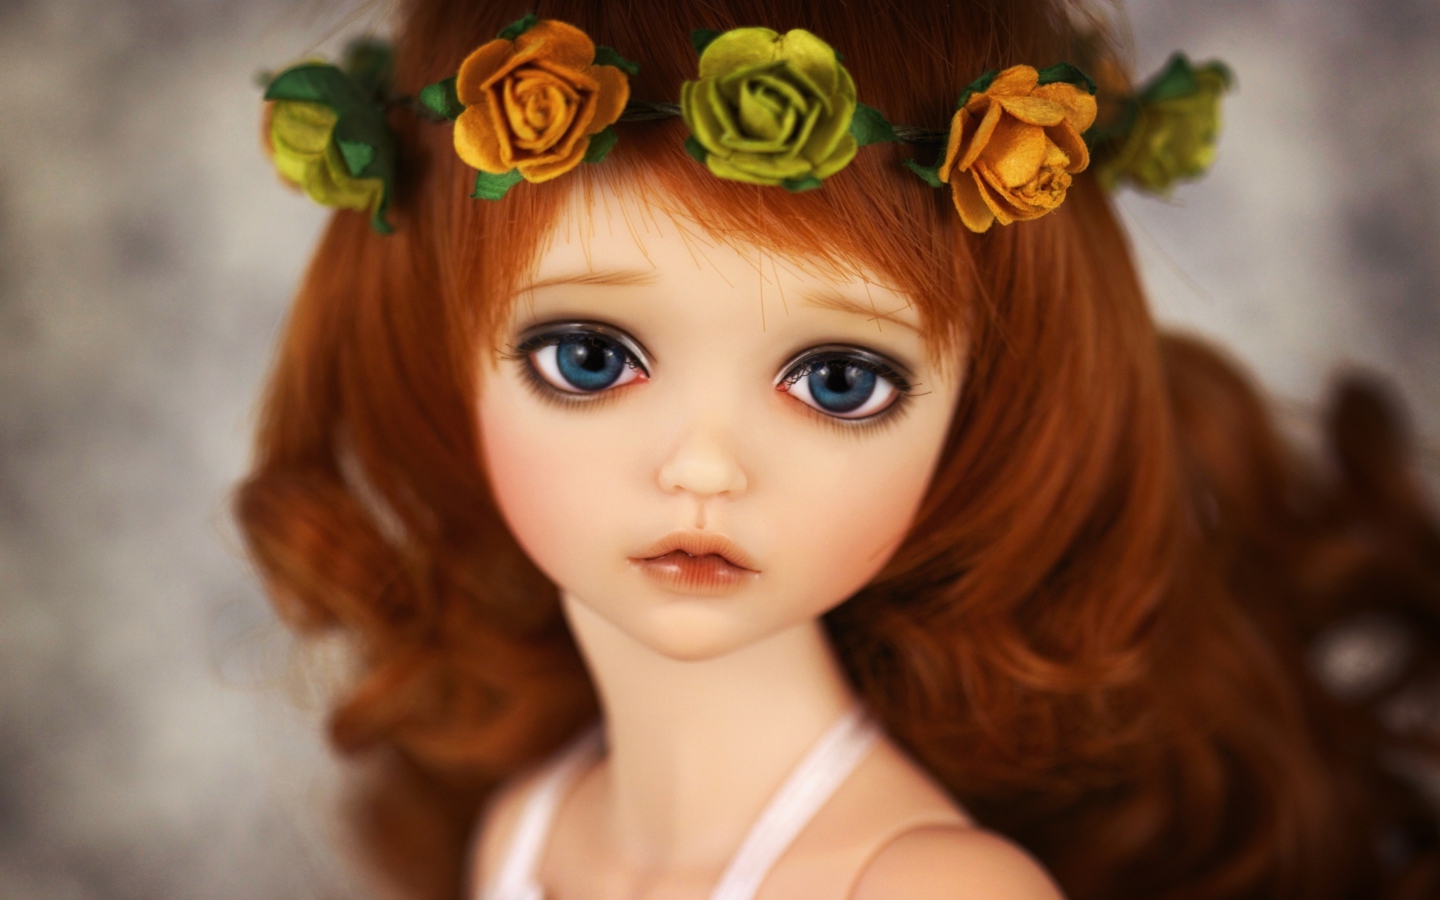 Redhead Doll With Flower Crown wallpaper 1440x900